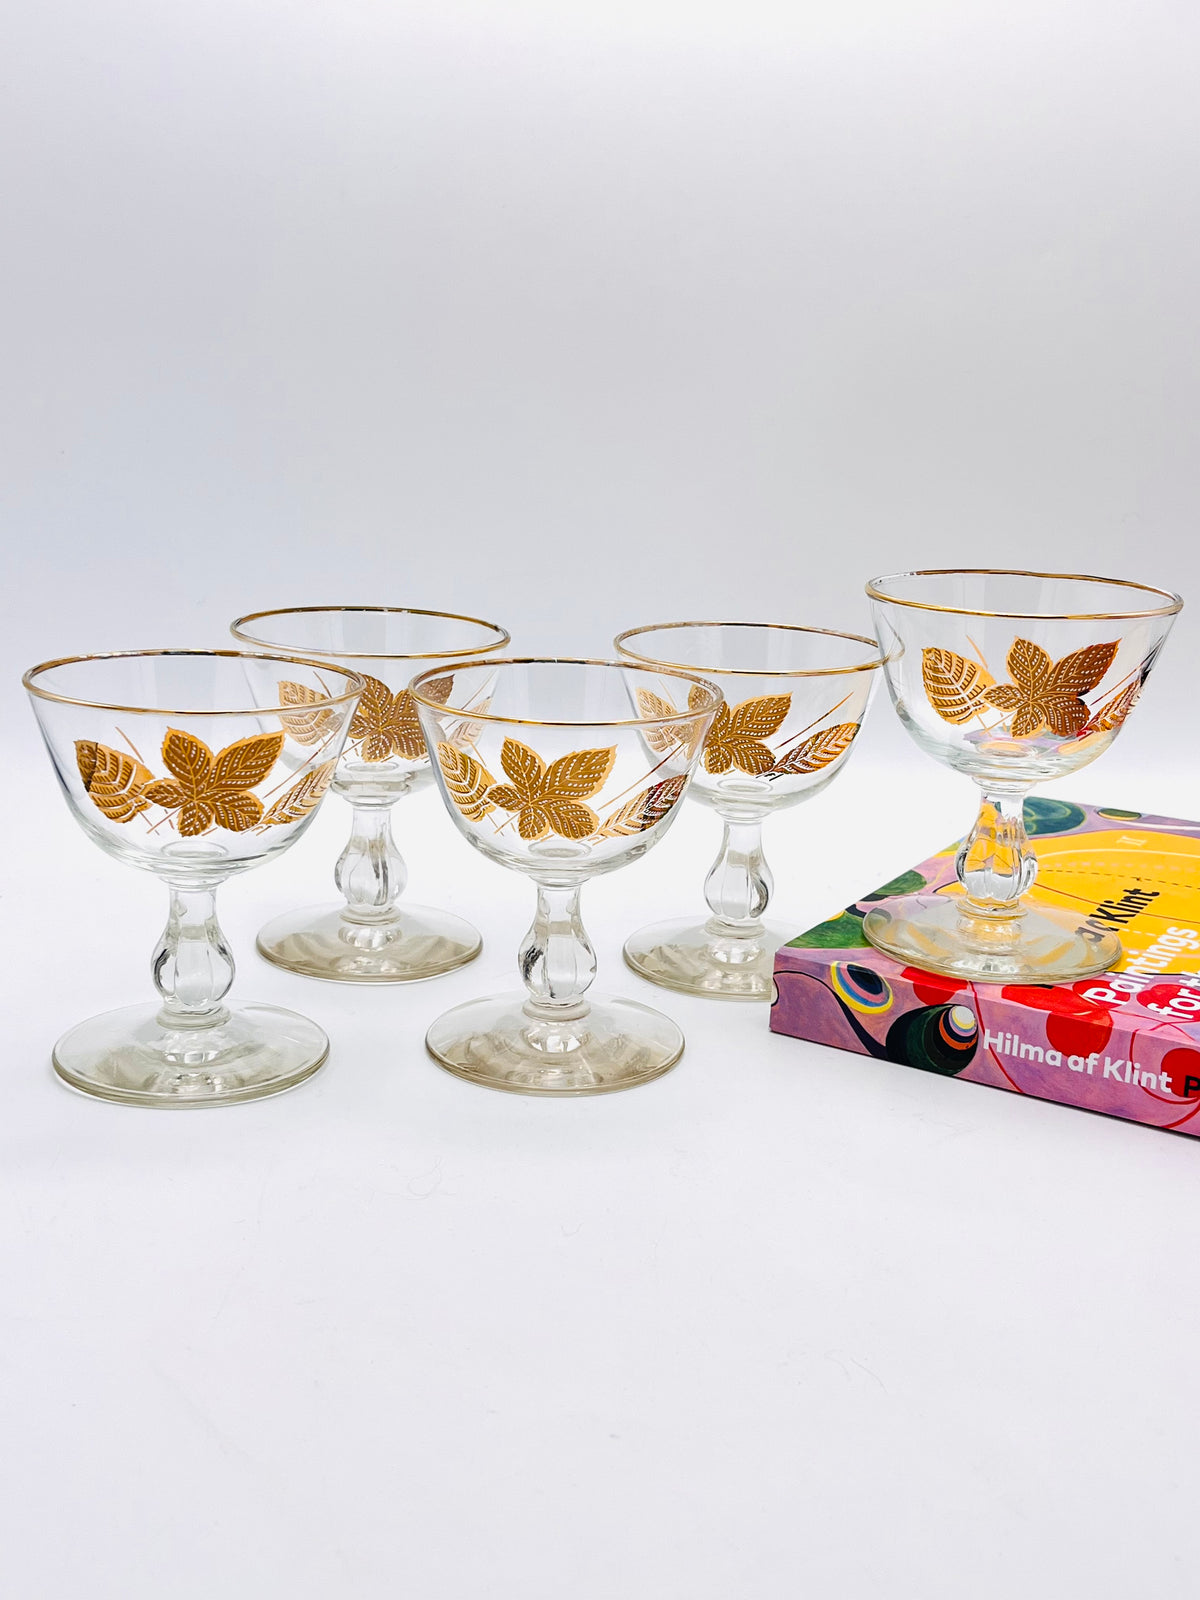 Vintage Gold-Plated Foliage Coupes - 5pc Set